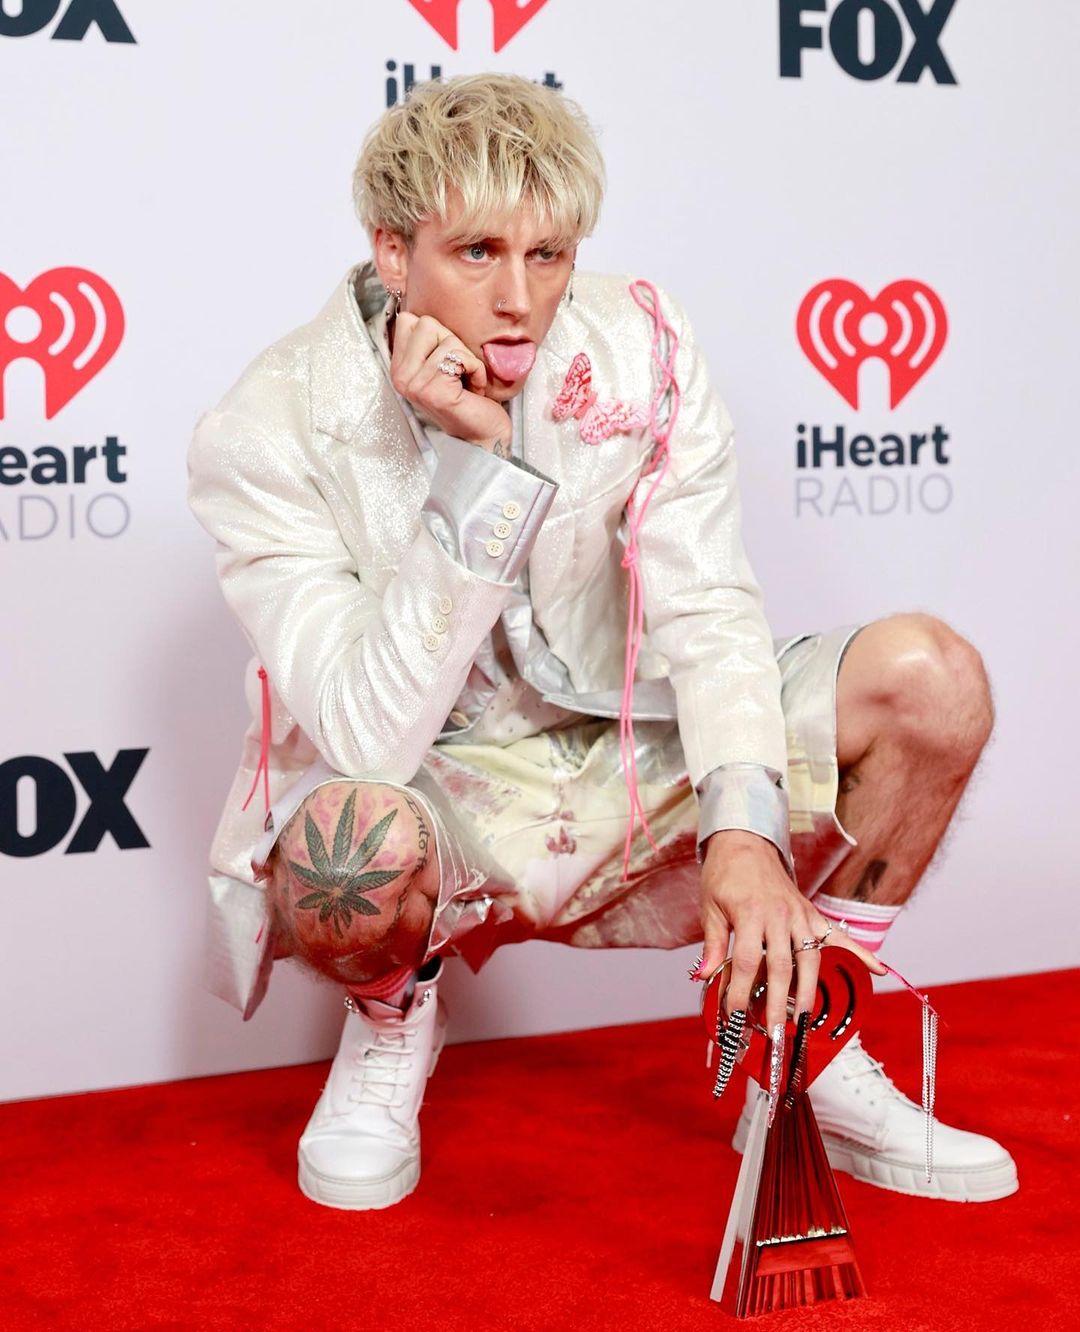 A photo showing Machine Gun Kelly in a crouched pose at a red carpet event.